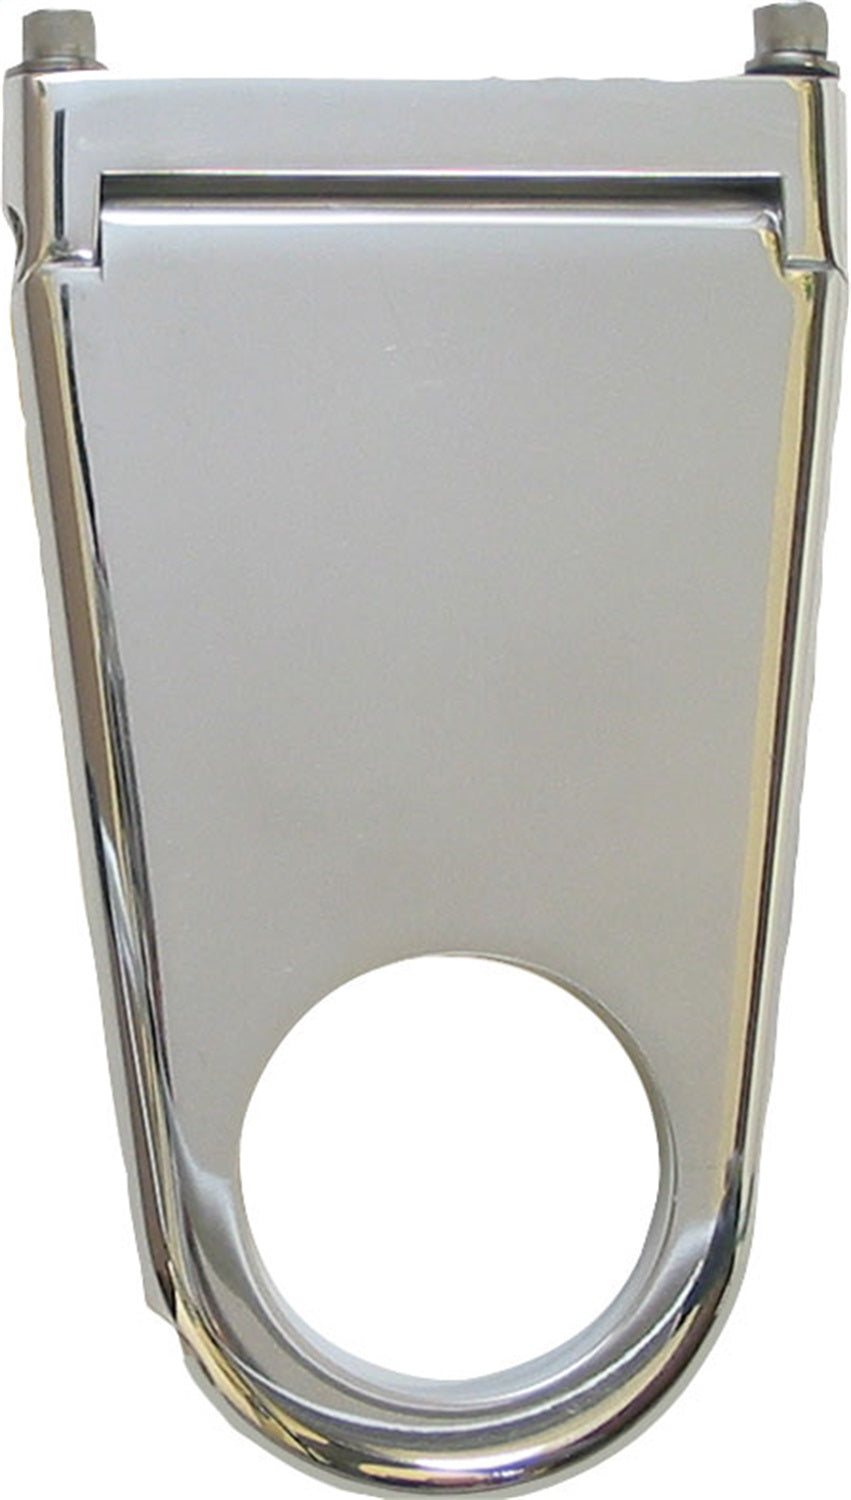 Borgeson Column Drop Blank Style 1-3/4in. Column X 5in. Drop Polished Aluminum 911175